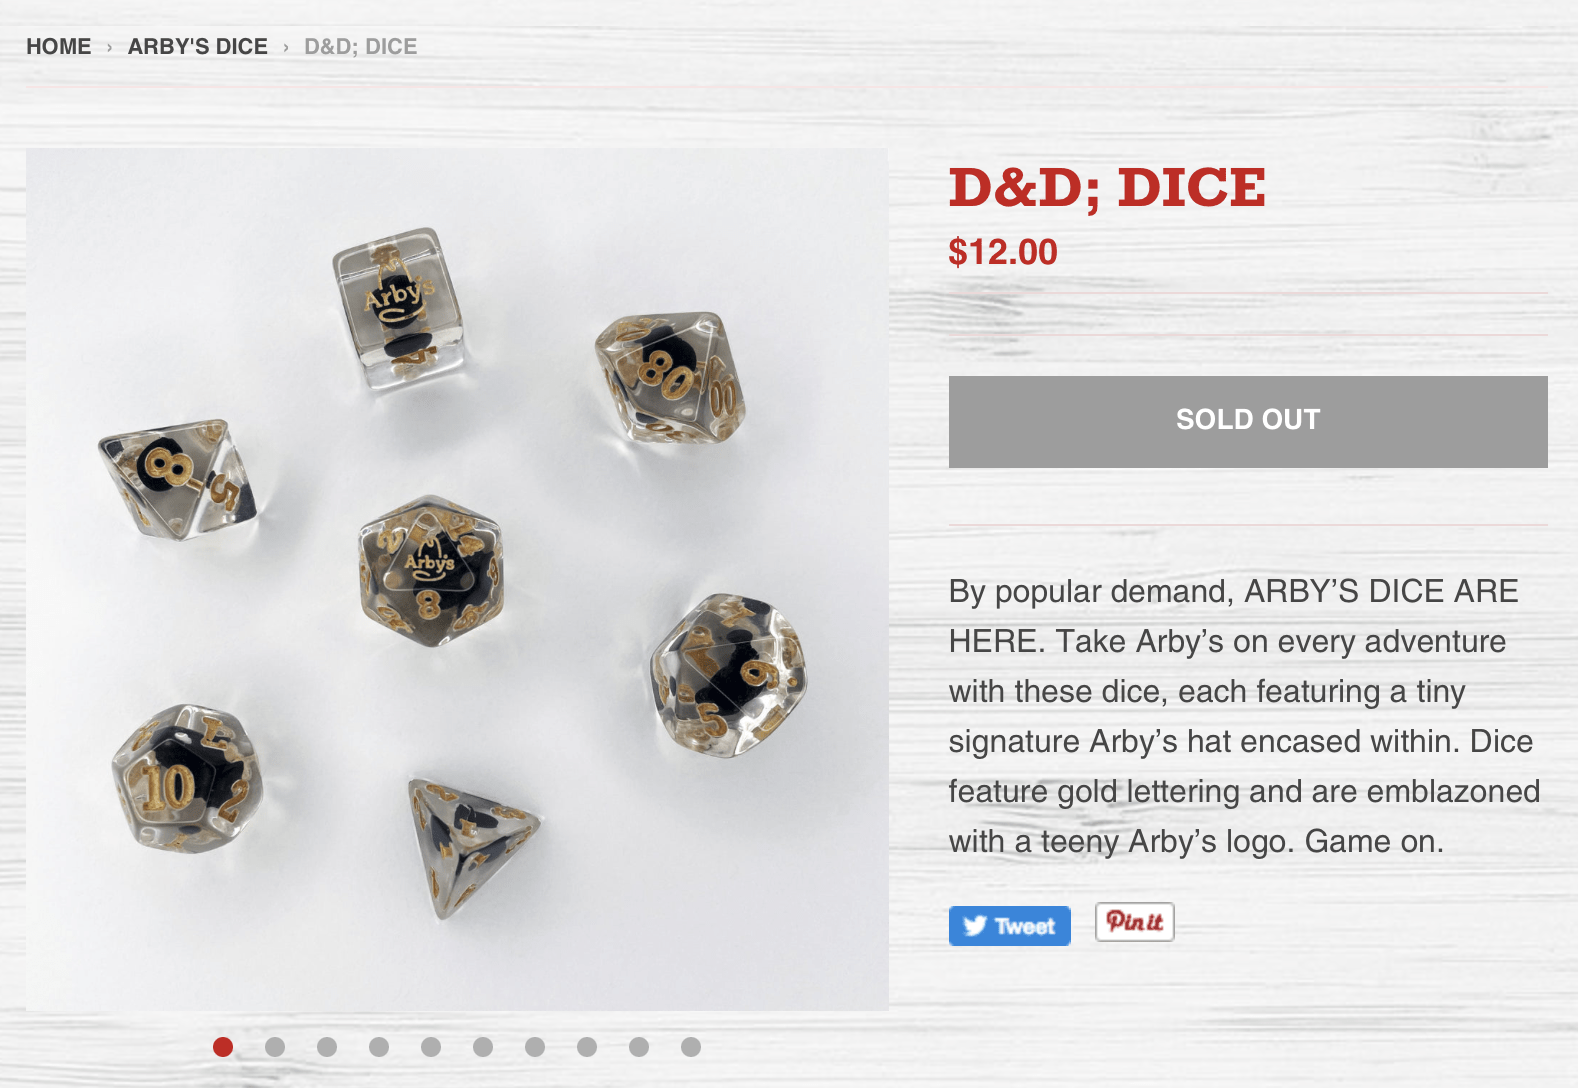 arby's dnd dice sold out